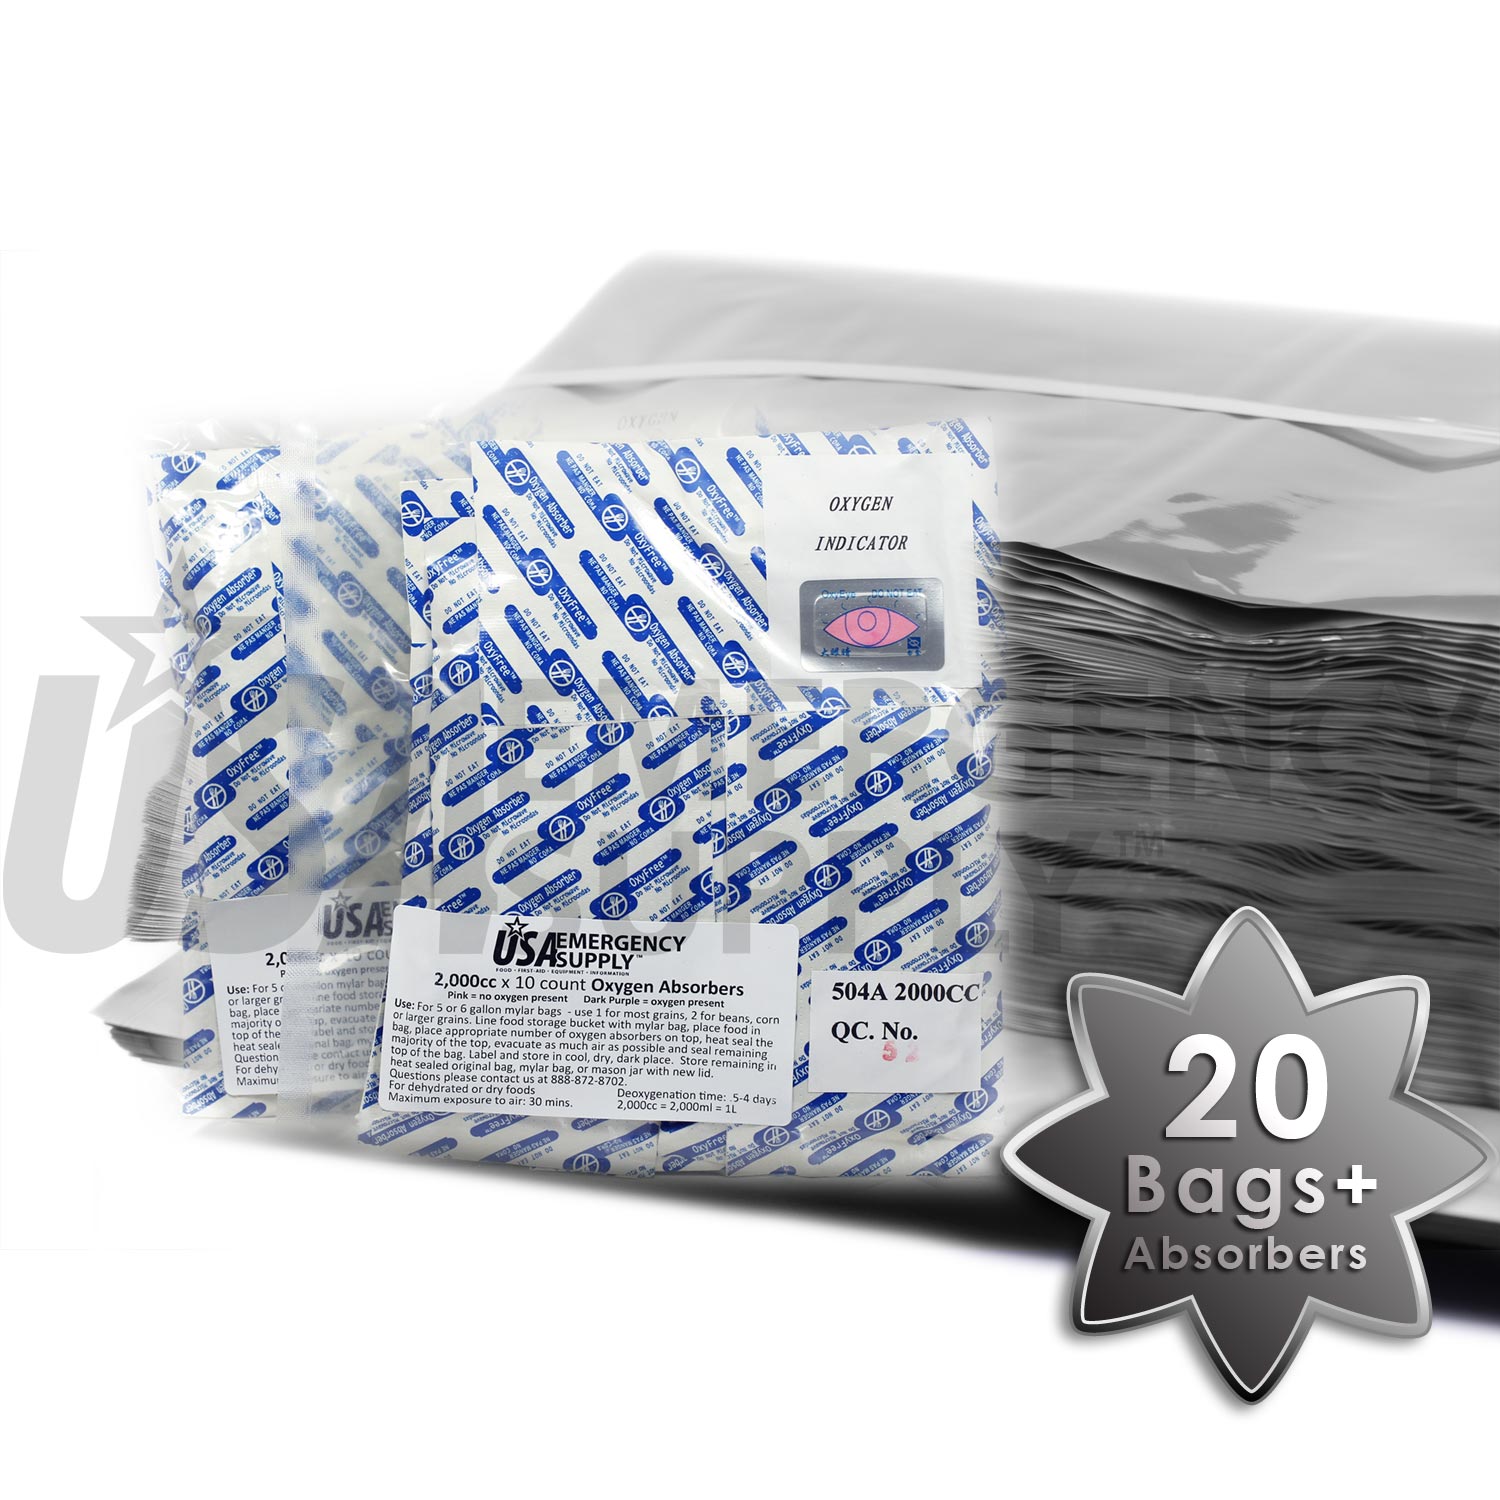 5 Gallon Mylar Food Storage Bags And Oxygen Absorbers 20 Count